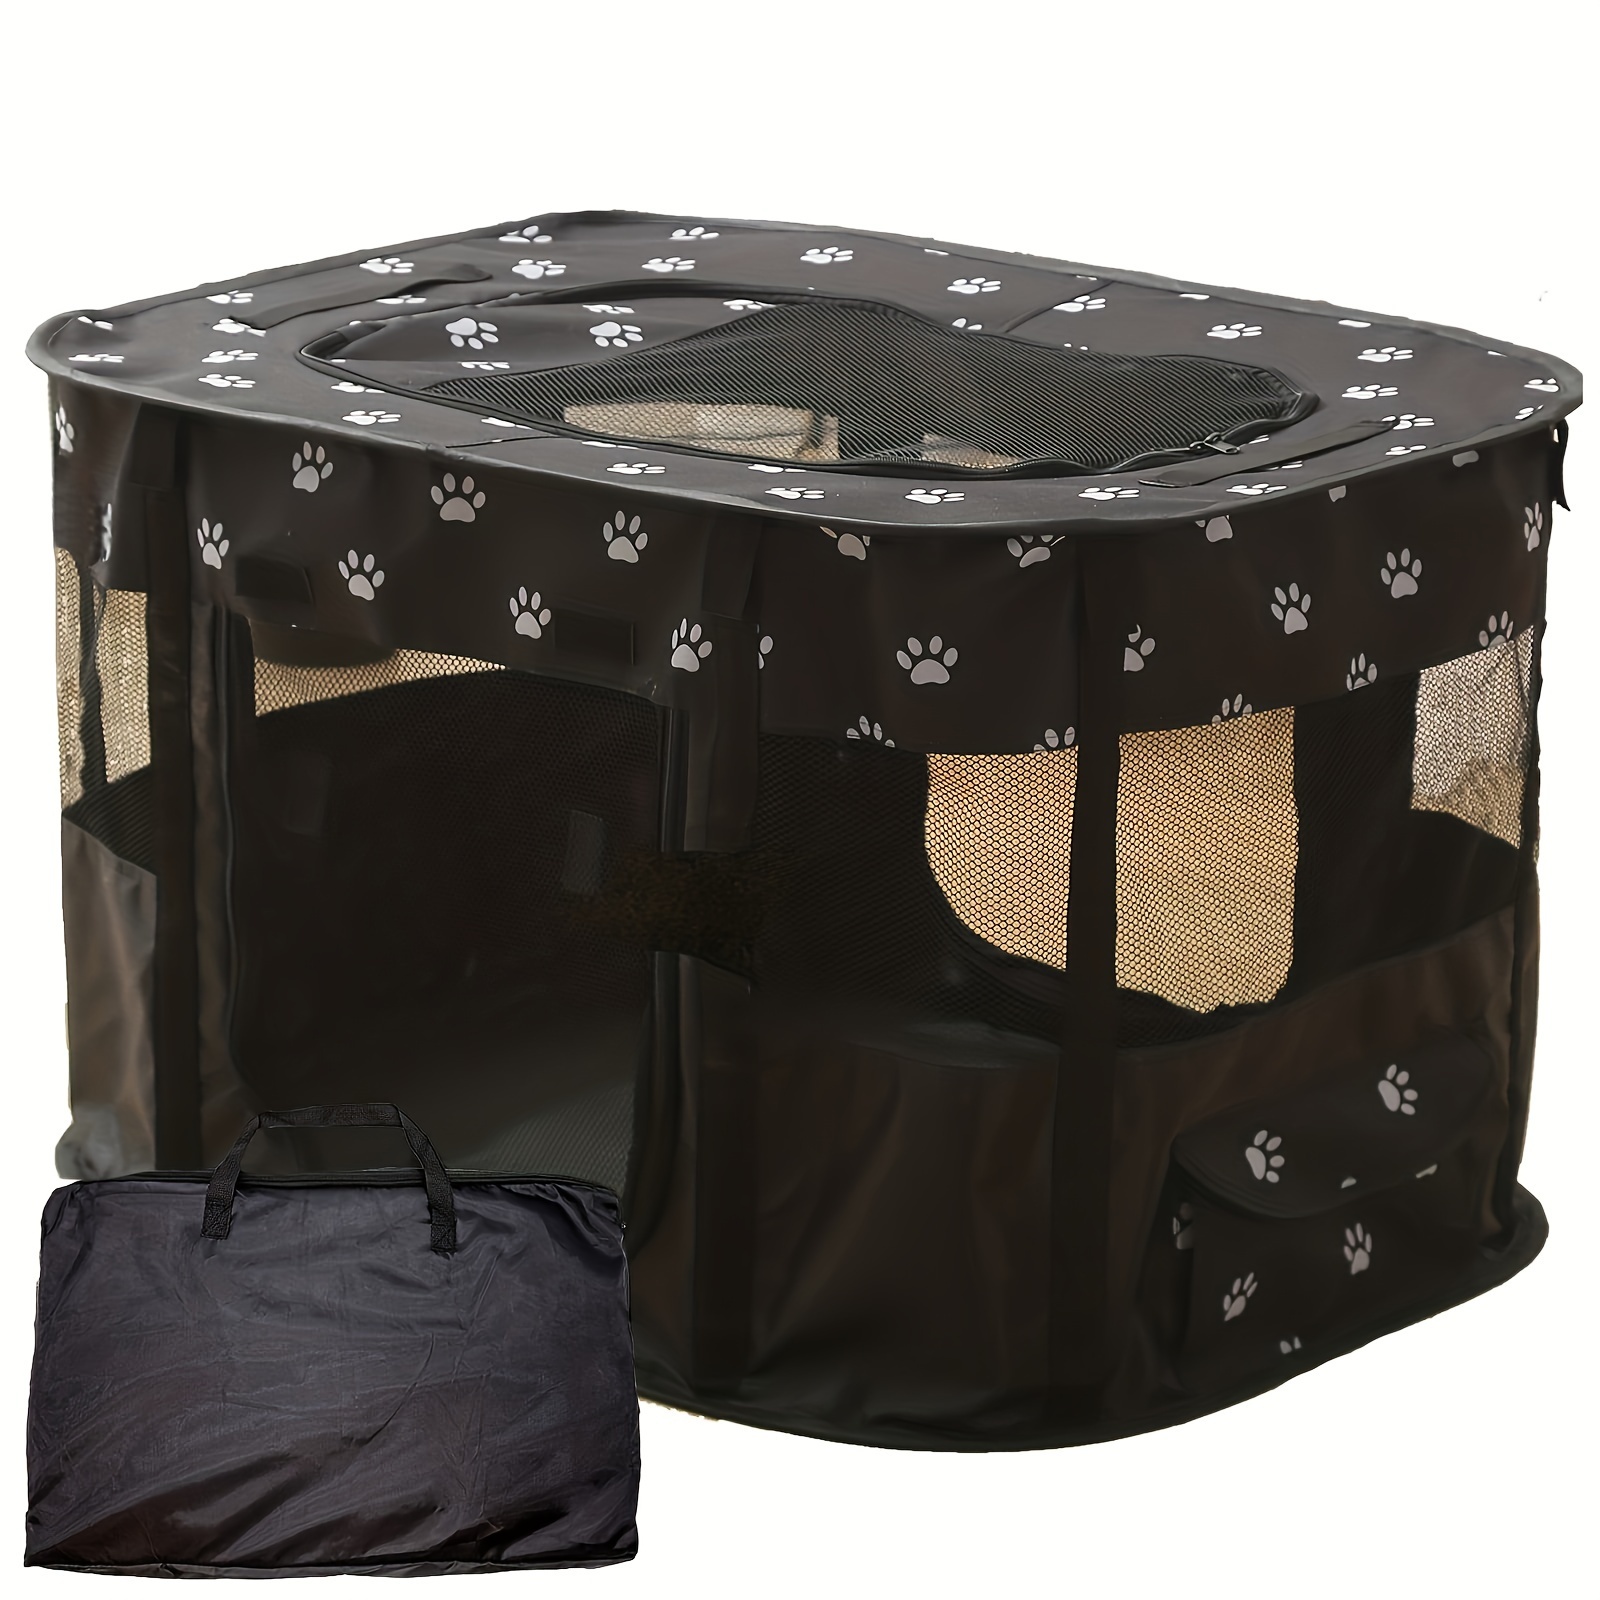 

A Foldable And Portable Cat Tent, And Birthing Room With Handle For Outdoor Use, Perfect For Dog And Cat Travel Fences, Easy To Assemble And Store, A Cozy Home For Cats And Dogs